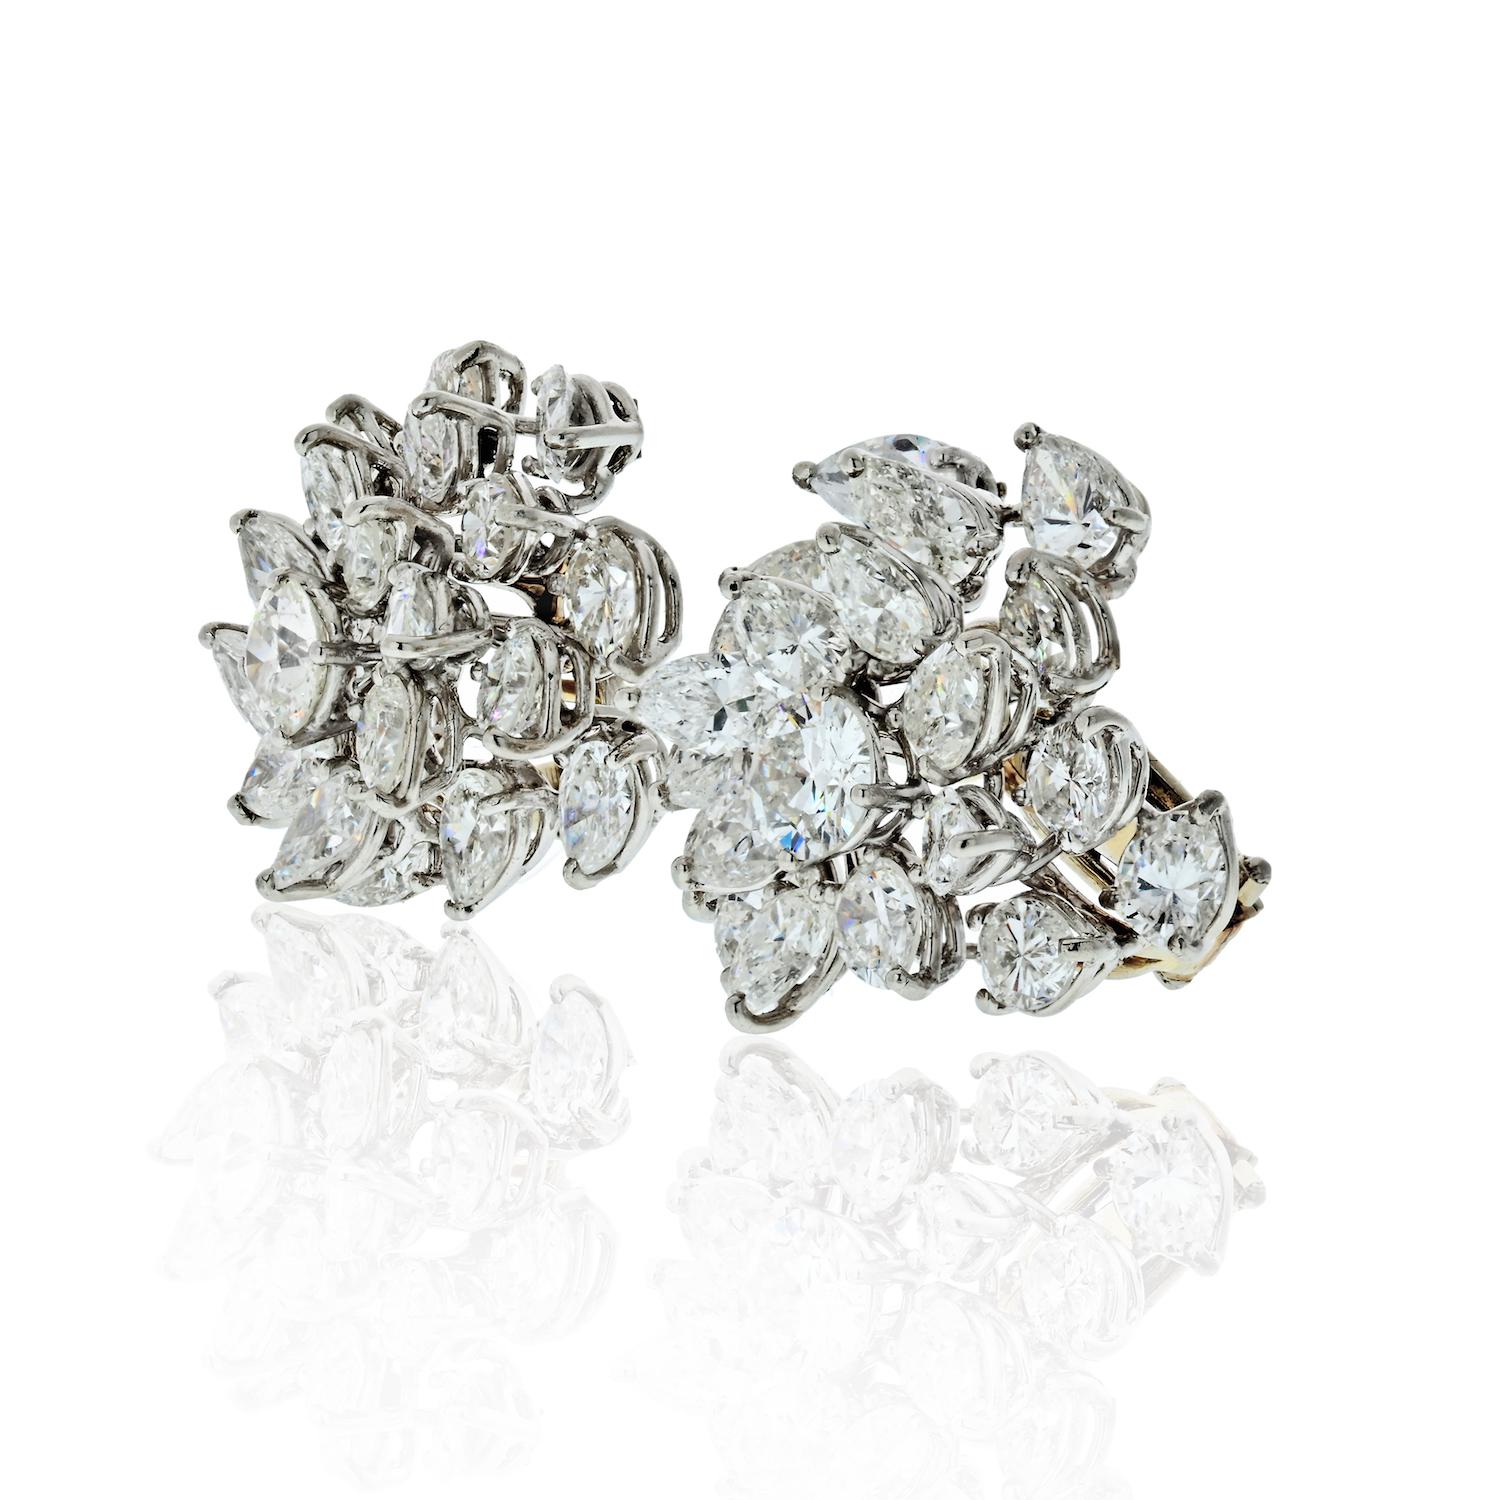 Beautiful cluster diamond earrings crafted in Platinum. Set with mixed-cut diamonds of 17.65cts.
Post back with an omega backing. 
Each earring showcases a round cut in the center and pear shapes overall.
Center round cut measures about 0.80ct.